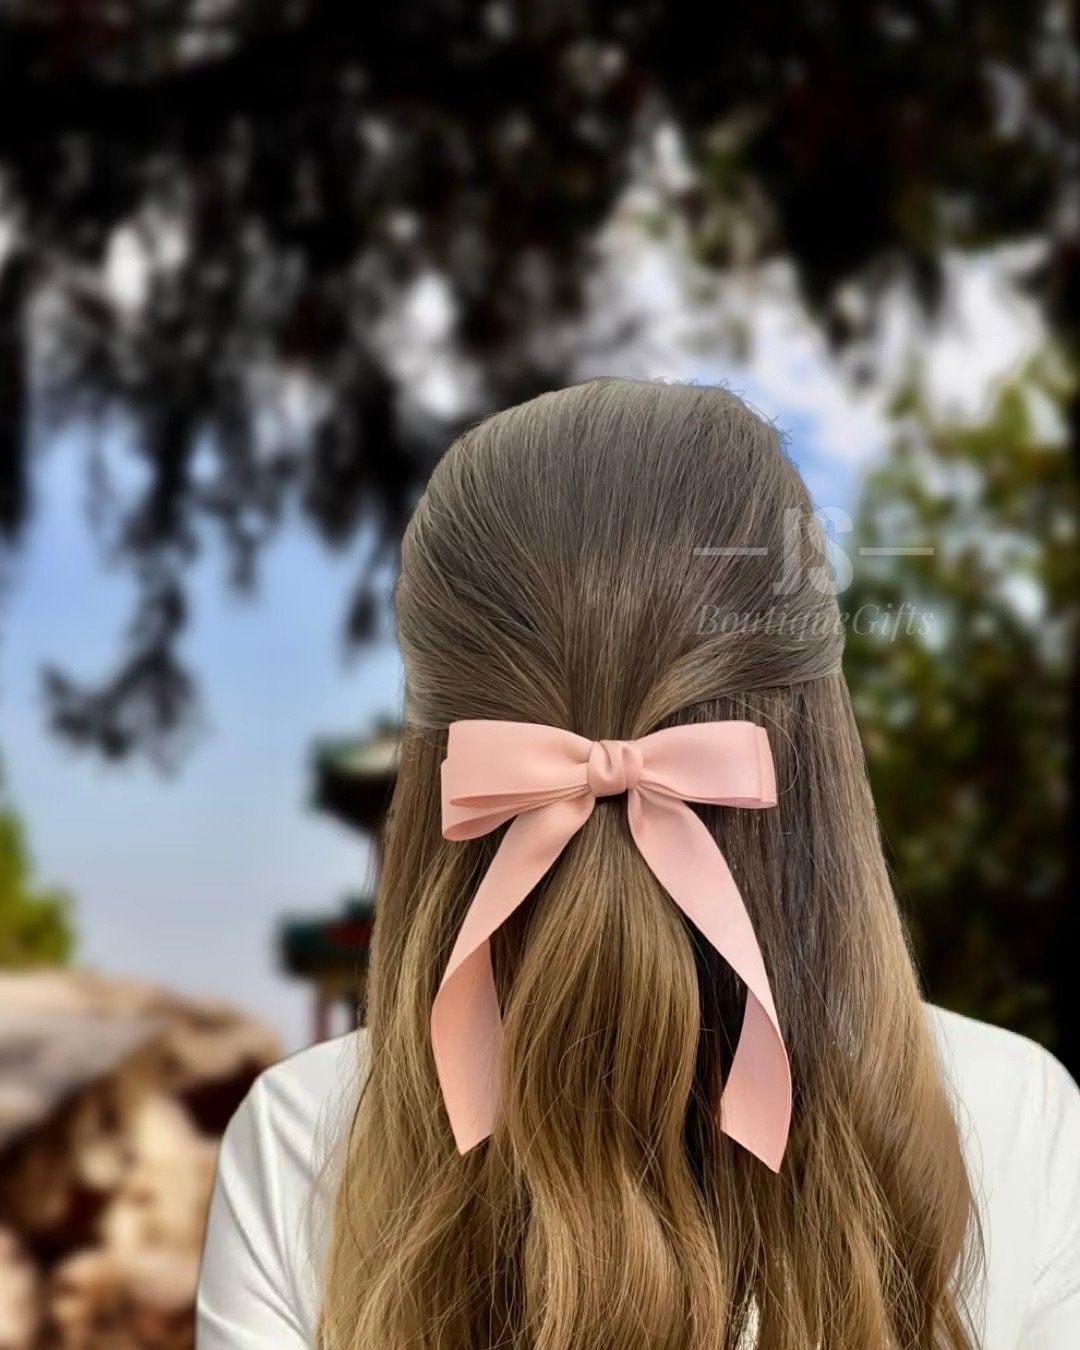 Stylish Bow with Big Ribbon Hair Clip for Women & girls color BLUE